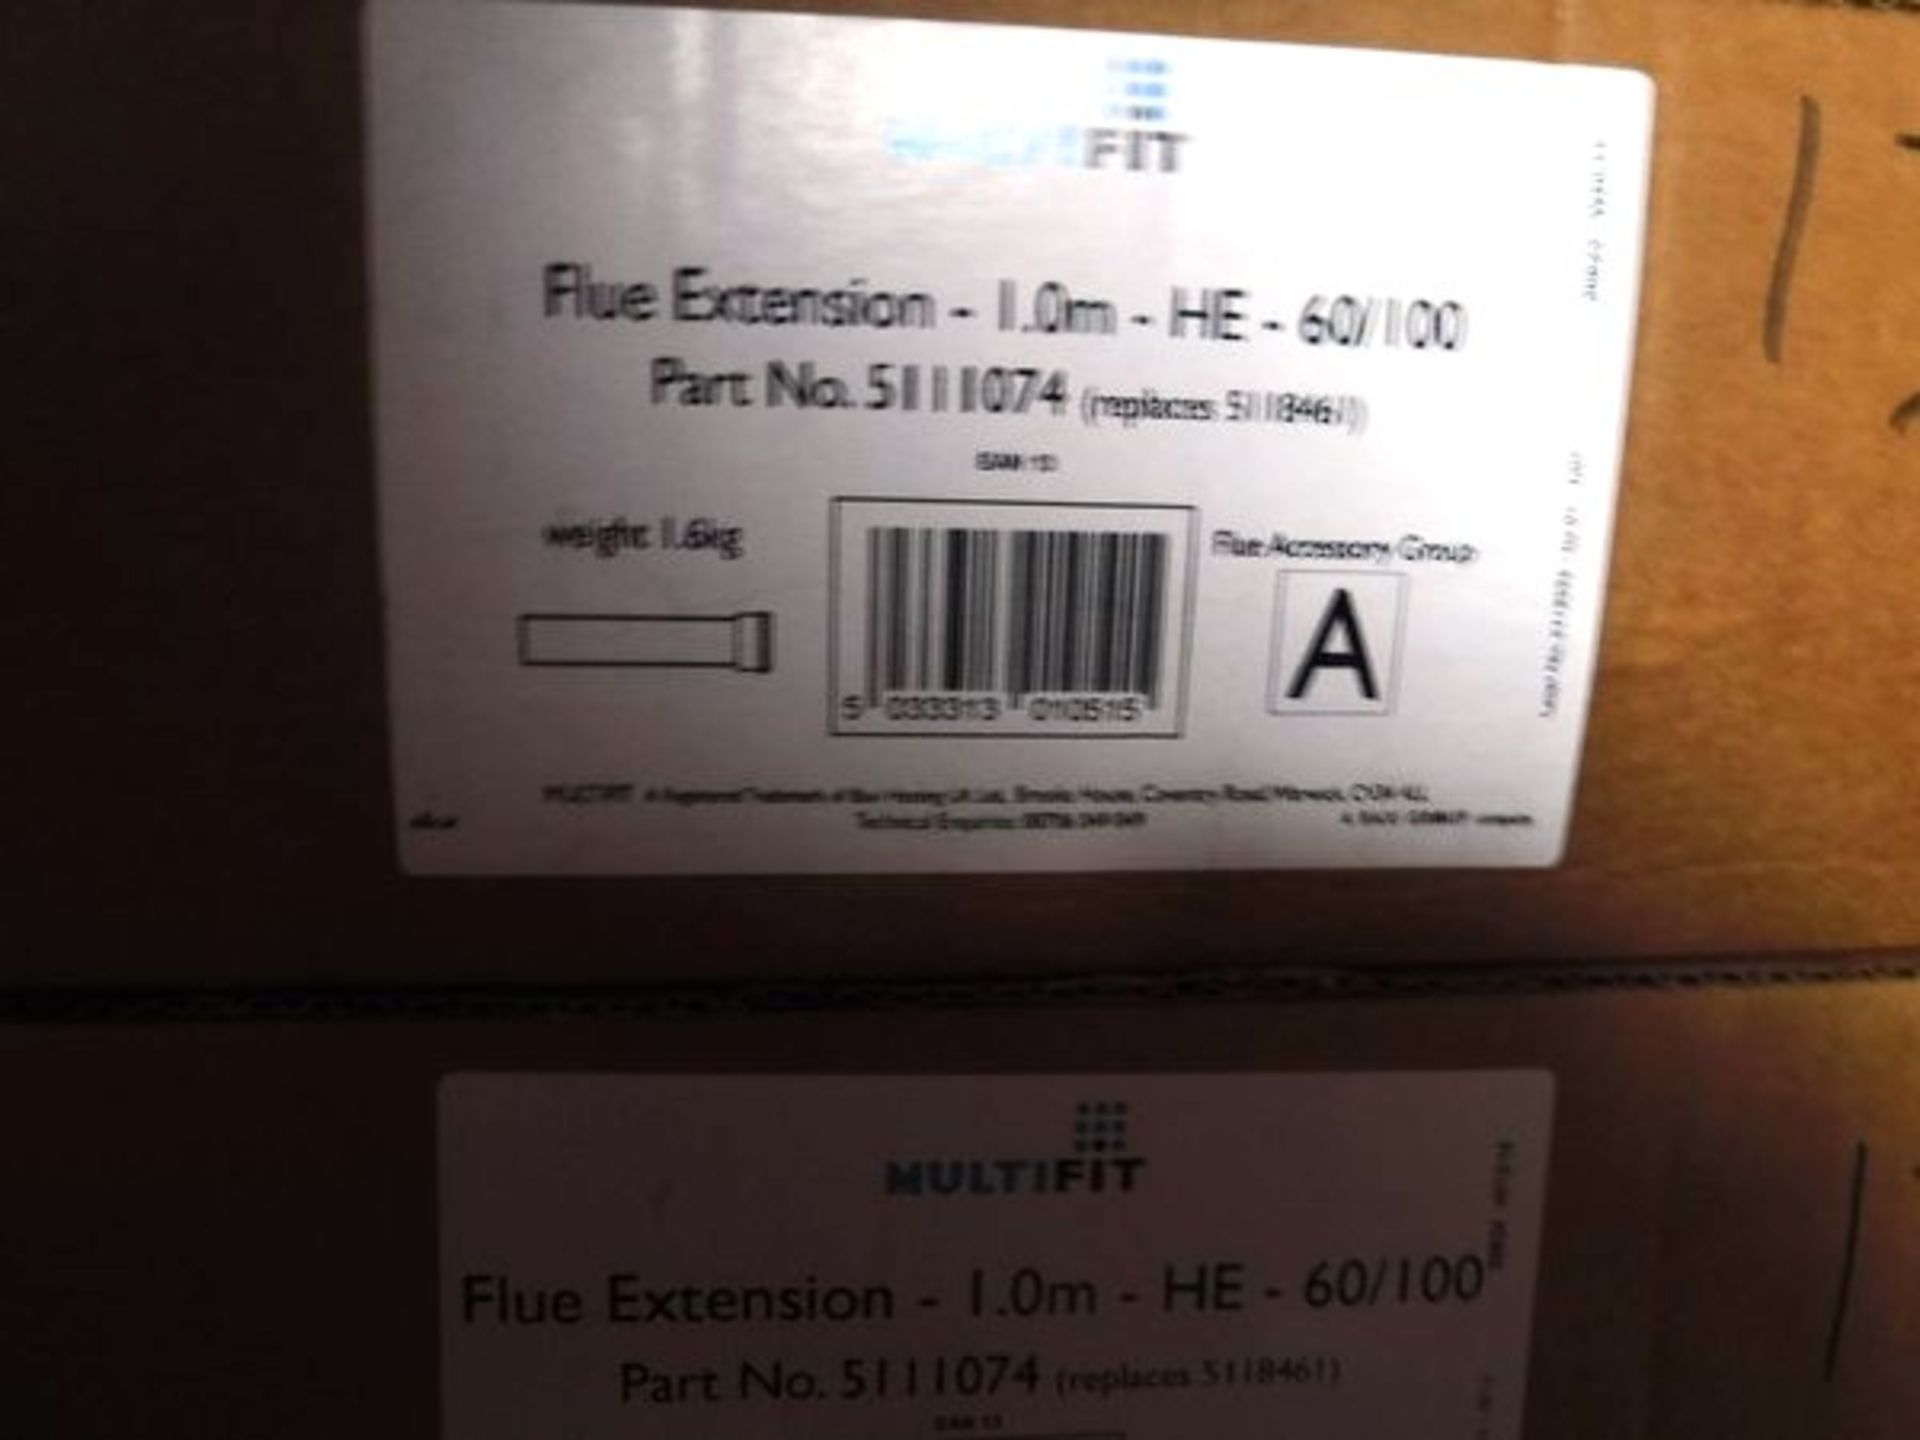 16 MULTIFIT 5111074 FLUE EXTENSIONS 1.0M HE / 60 / 100 - Image 4 of 4